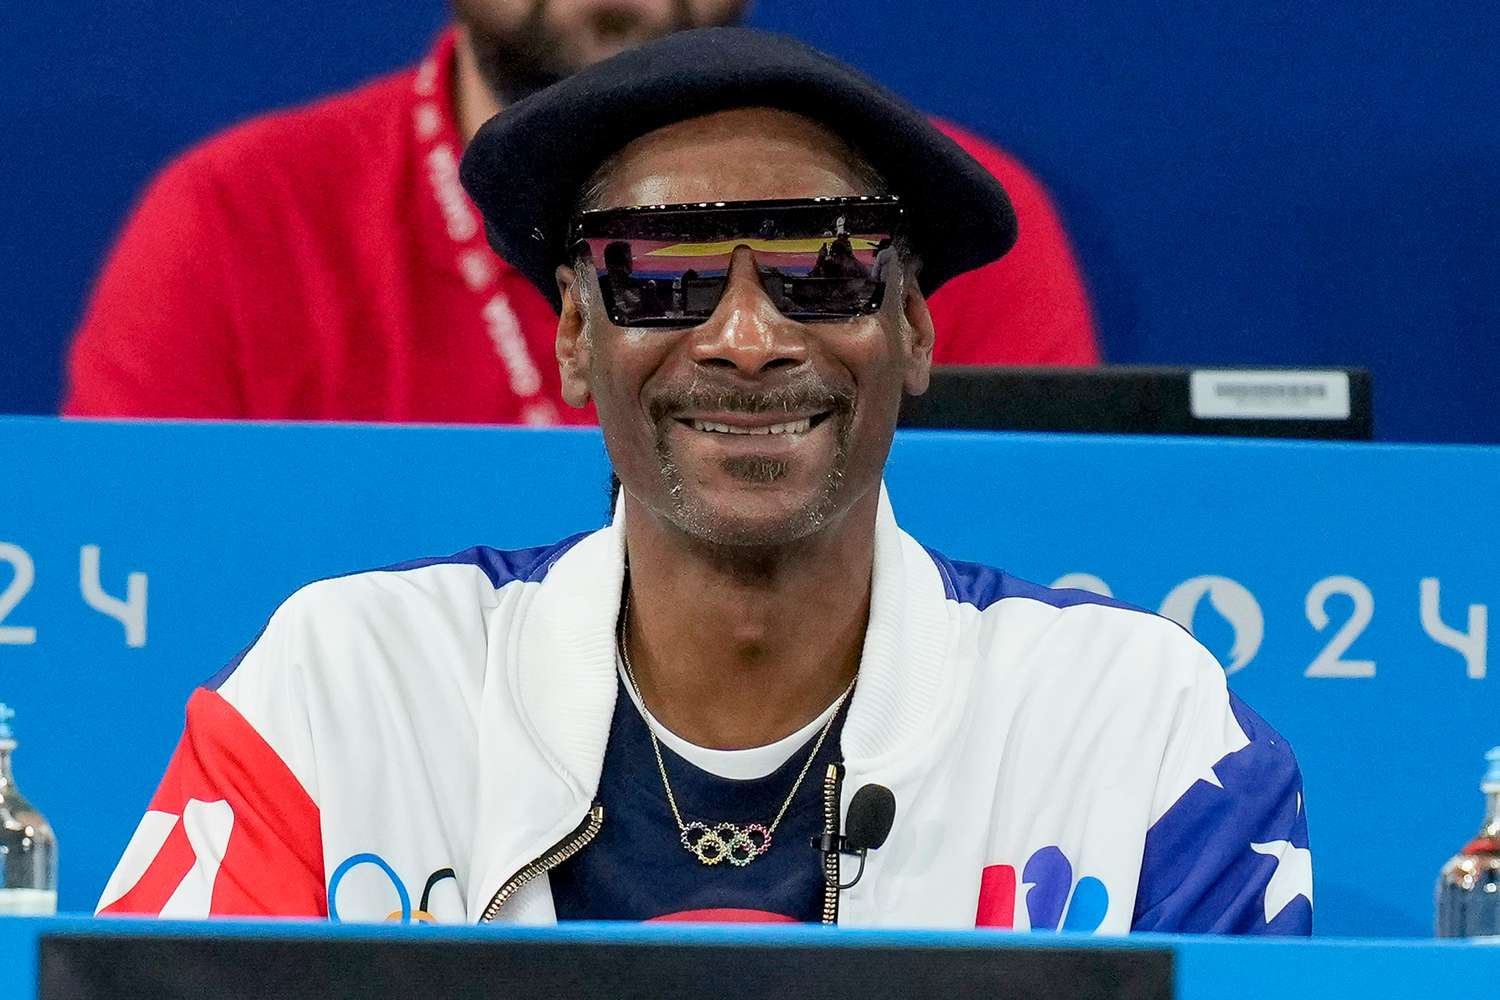 Snoop Dogg's Olympic pin is what everybody in Paris wants